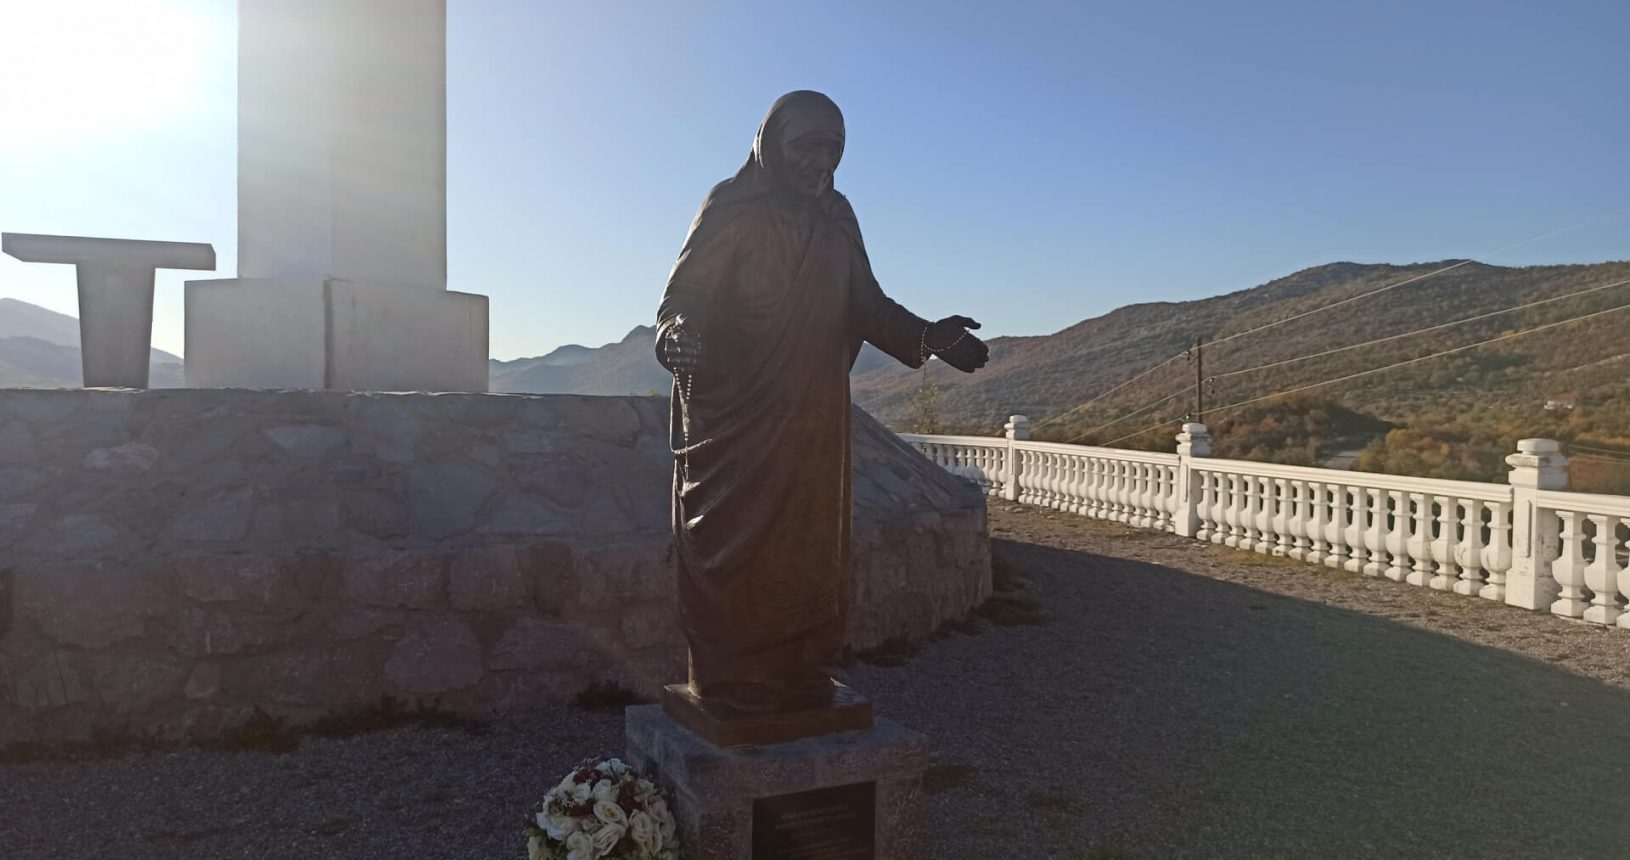 Mother Teresa Viewpoint with big cross and Jesus